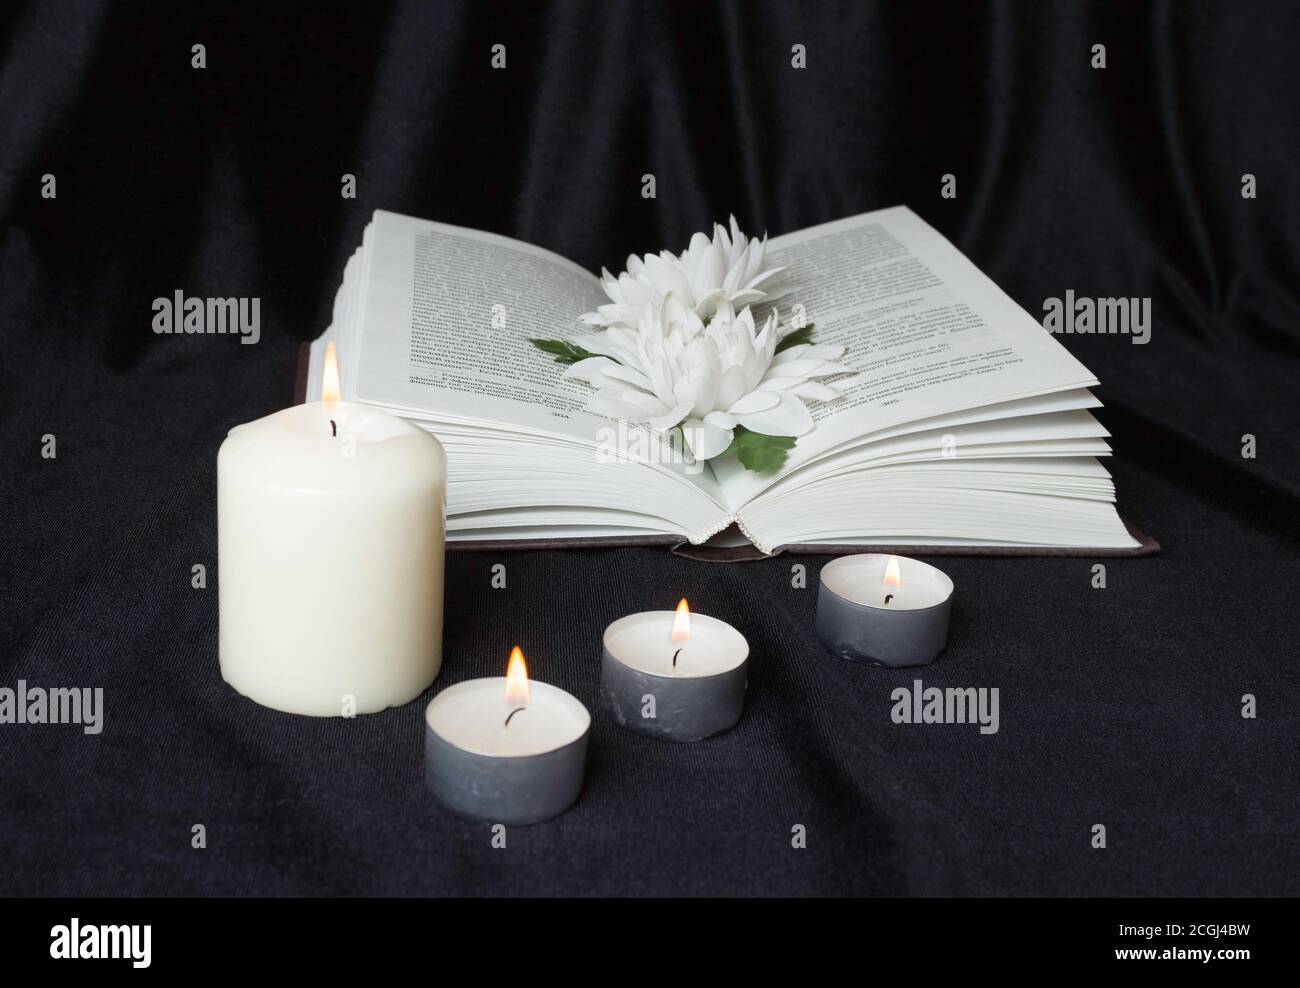 Condolence card. A white memorial candle with white flowers and an open book. The funeral, the sadness. Stock Photo